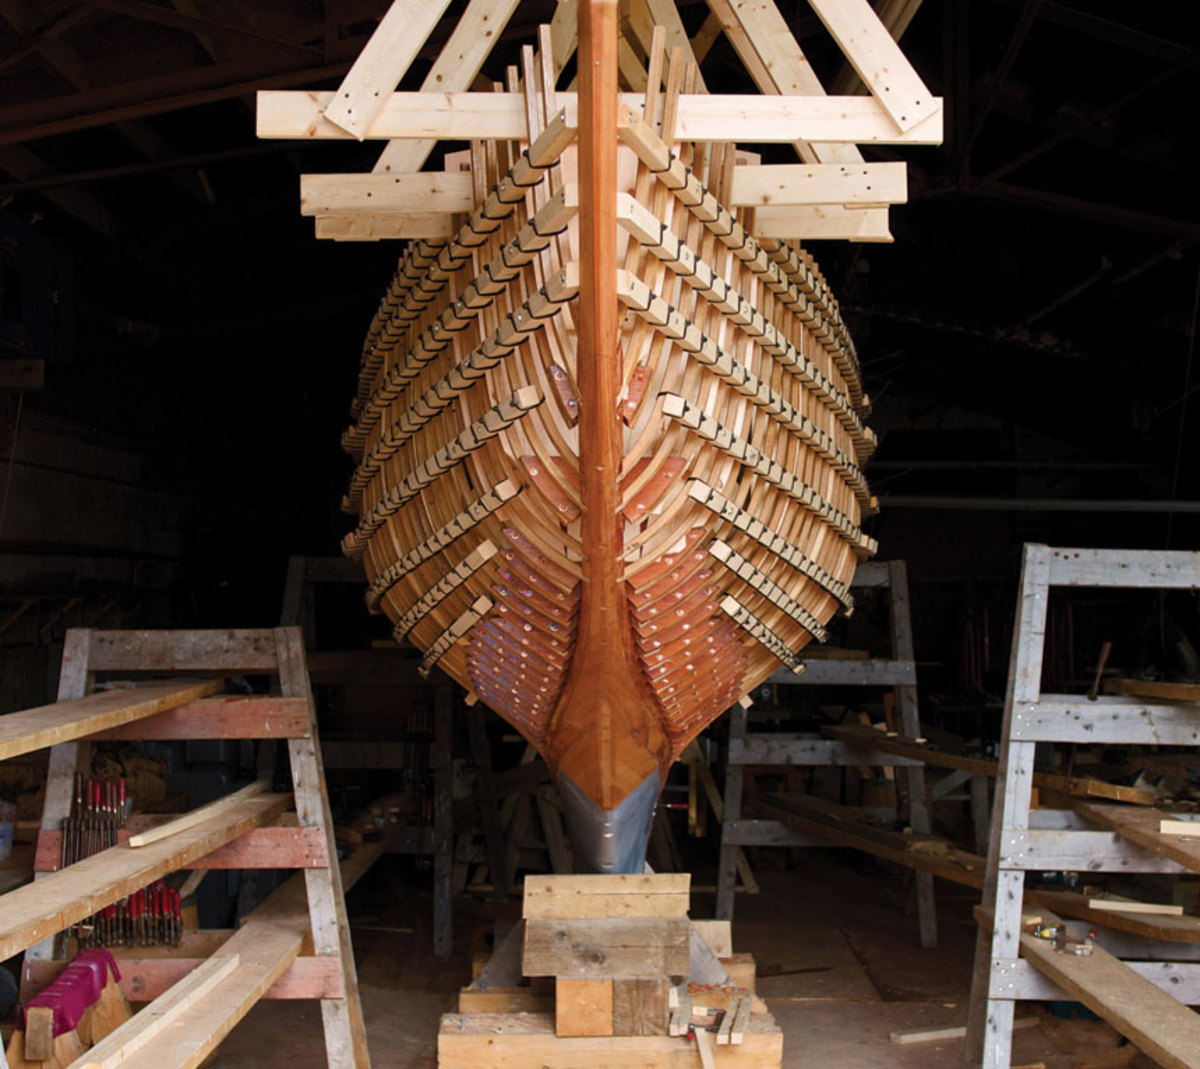 This 6 Metre yacht, Jill, which was rebuilt at Rockport Marine, demonstrates the yard’s wizardry with wood. 